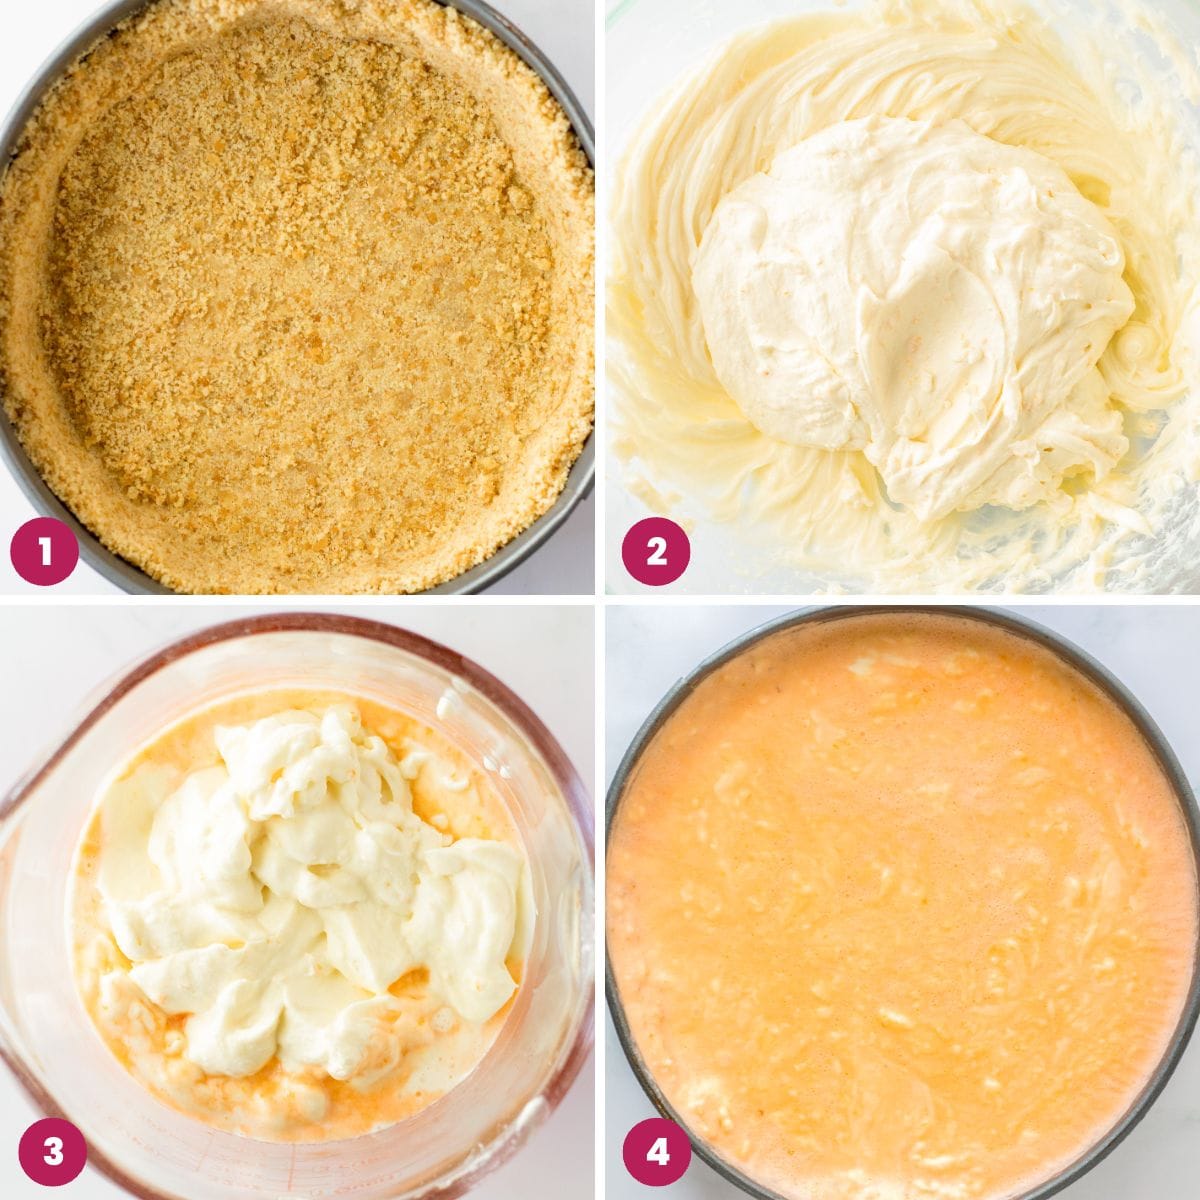 Collage of 4 images showing how to make orange creamsicle cheesecake